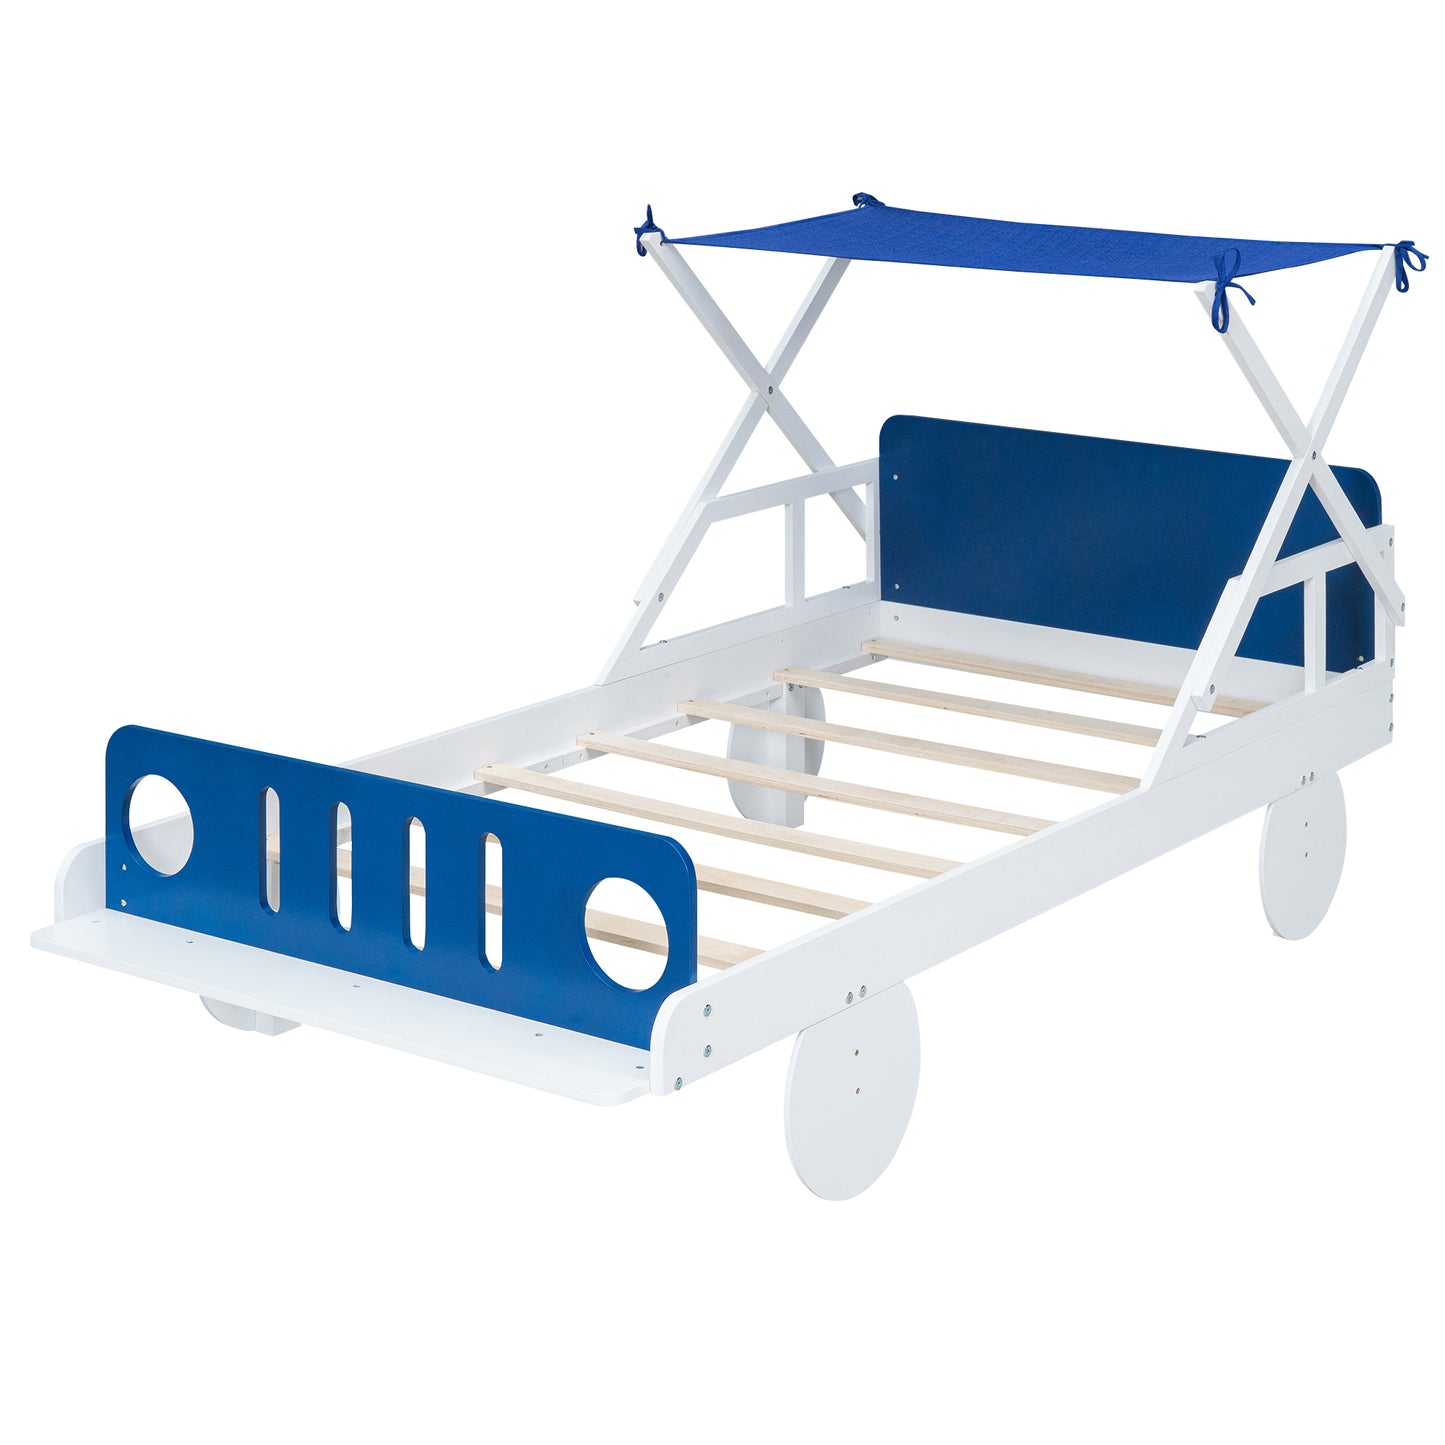 Wood Twin Size Car Platform Bed with Ceiling Cloth, Headboard and Footboard, White+Blue